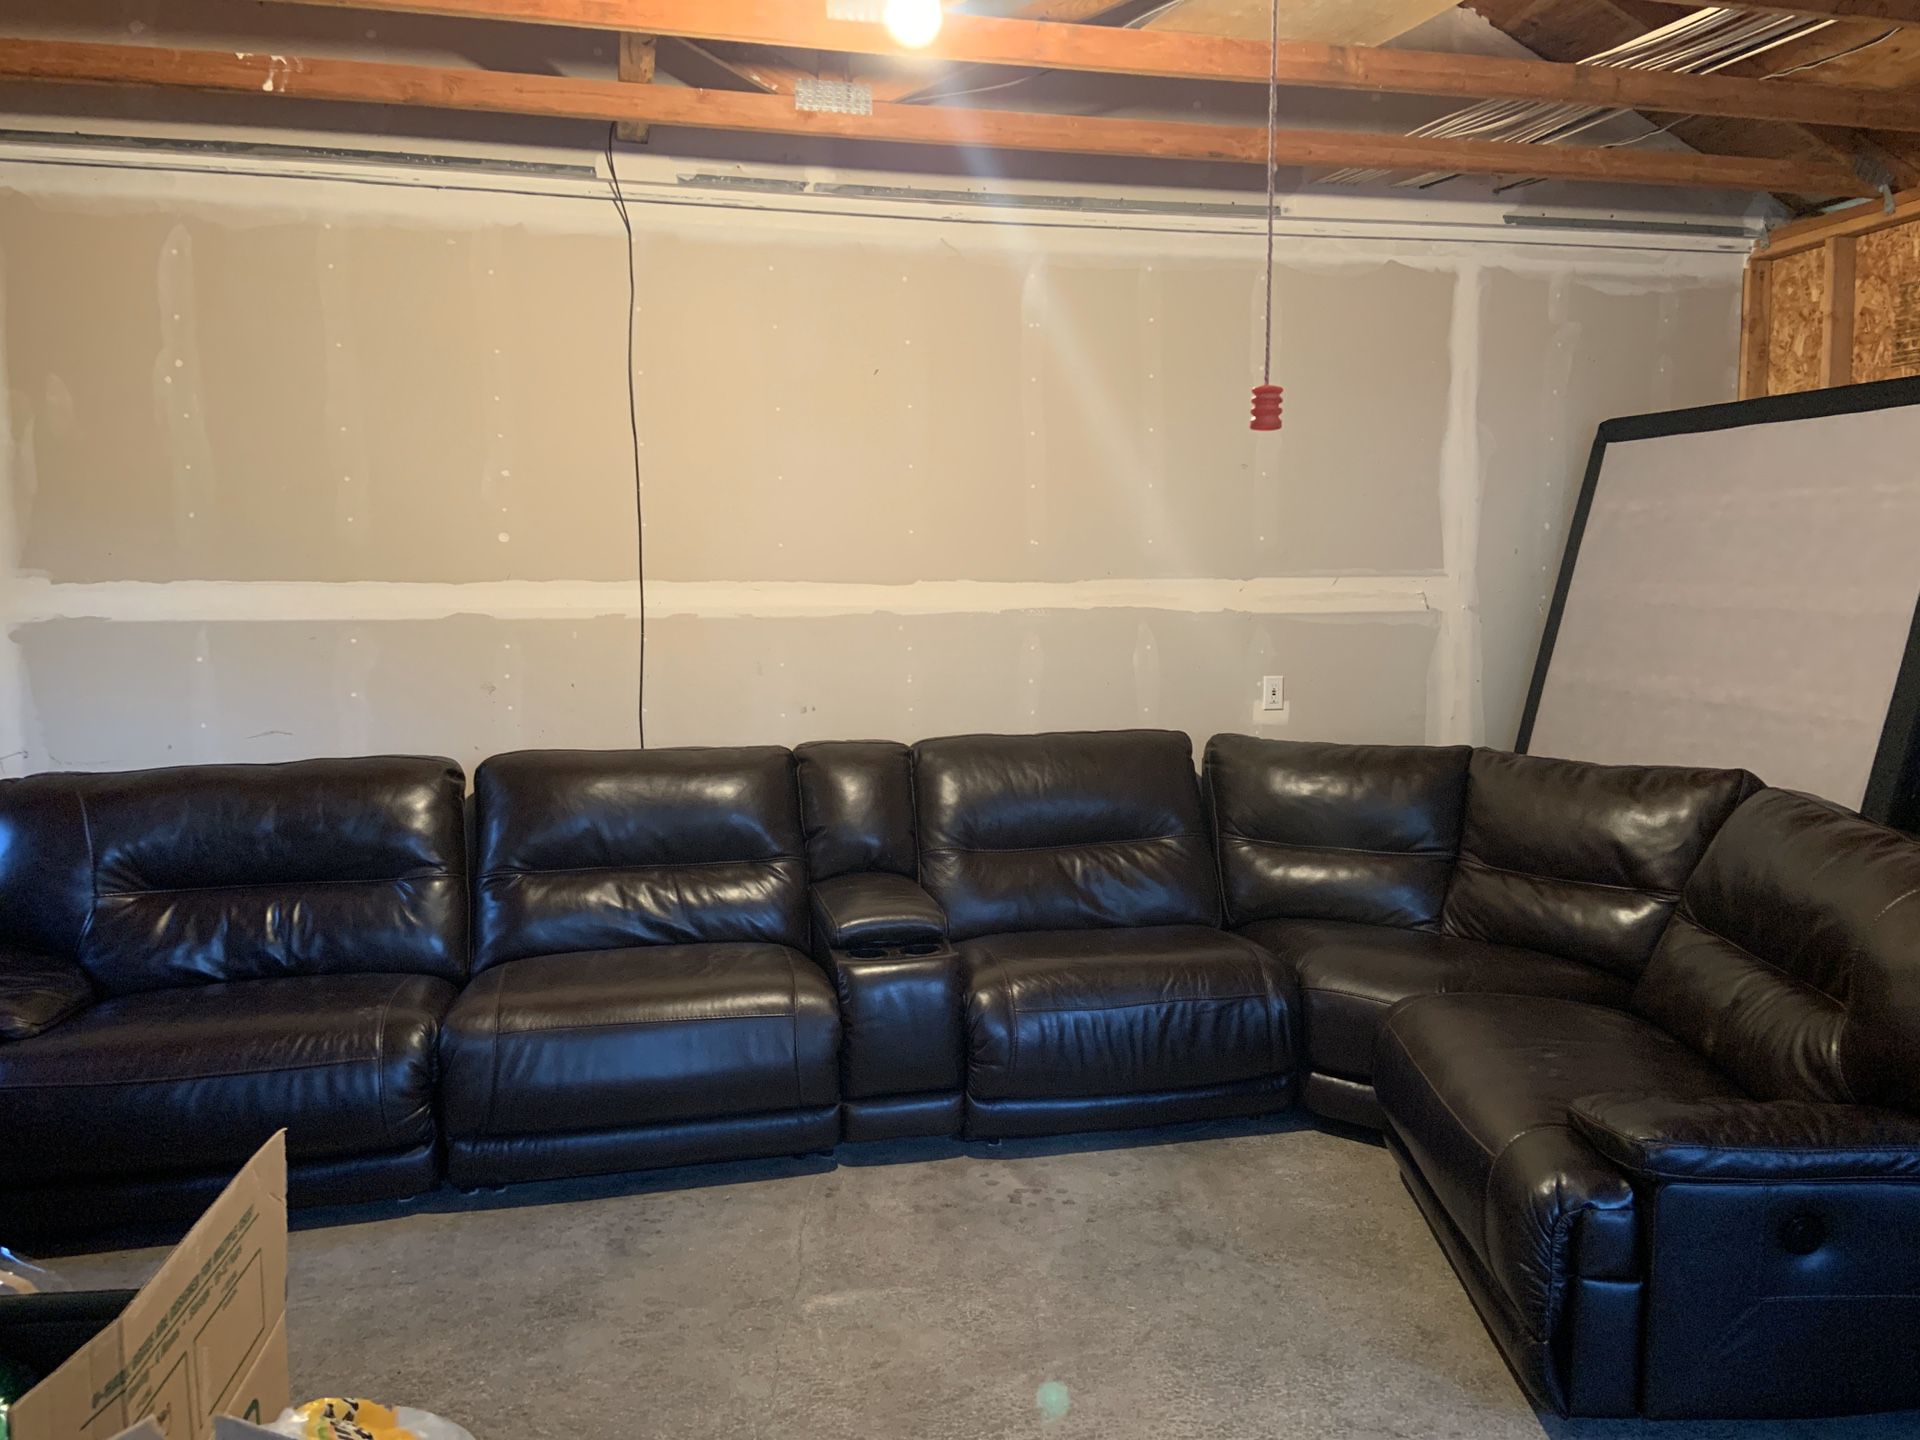 Leather couch and ottoman